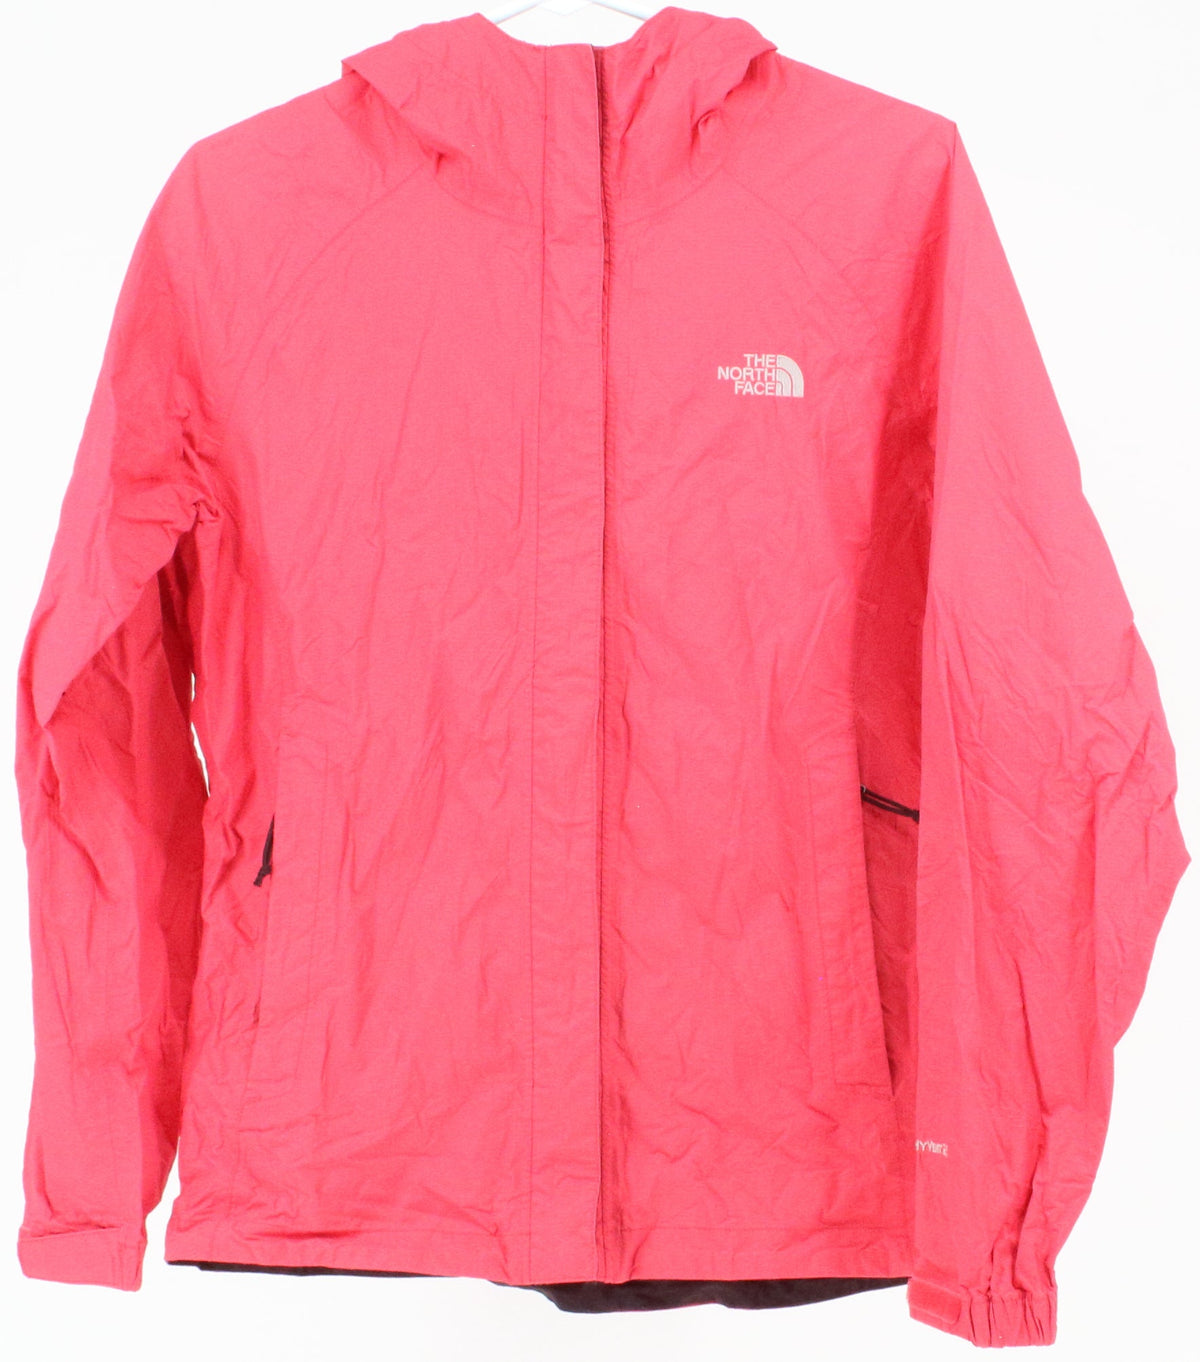 The North Face HyVent 2.5L Pink Hooded Women's Nylon Jacket